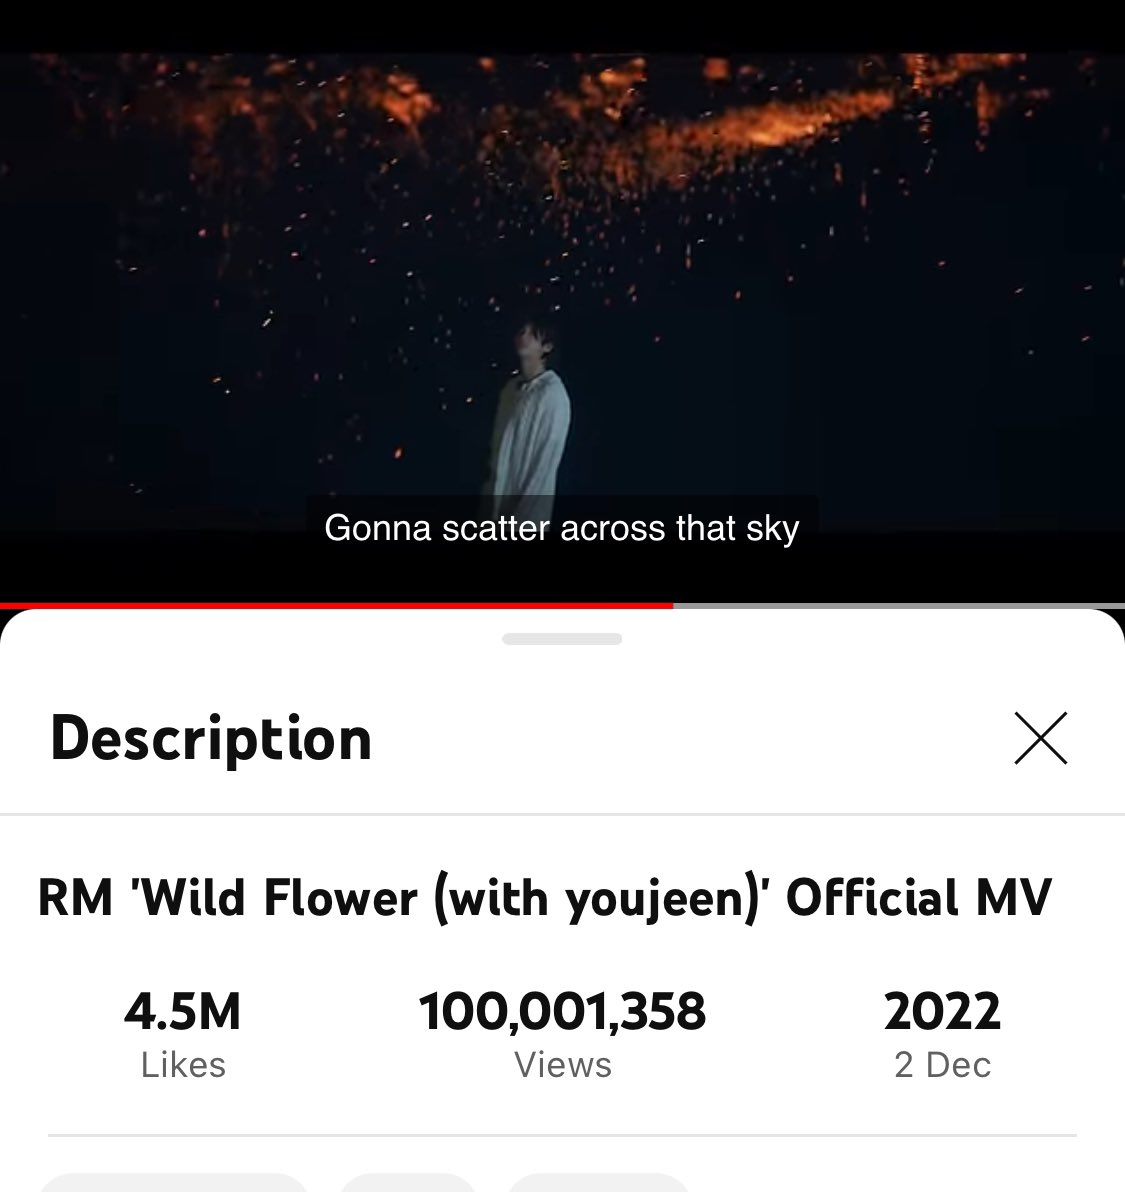 WILD FLOWER MV REACHES 100M WIEWS ON YOUTUBE!!! 🎉🎉🥳🎊

To all ARMYs who streamed it on YT, I appreciate you! 💜😭

I’ll be updating playlists with the next MVs we should focus on & I’ll share them in a little while.

Congratulations Namjoon!